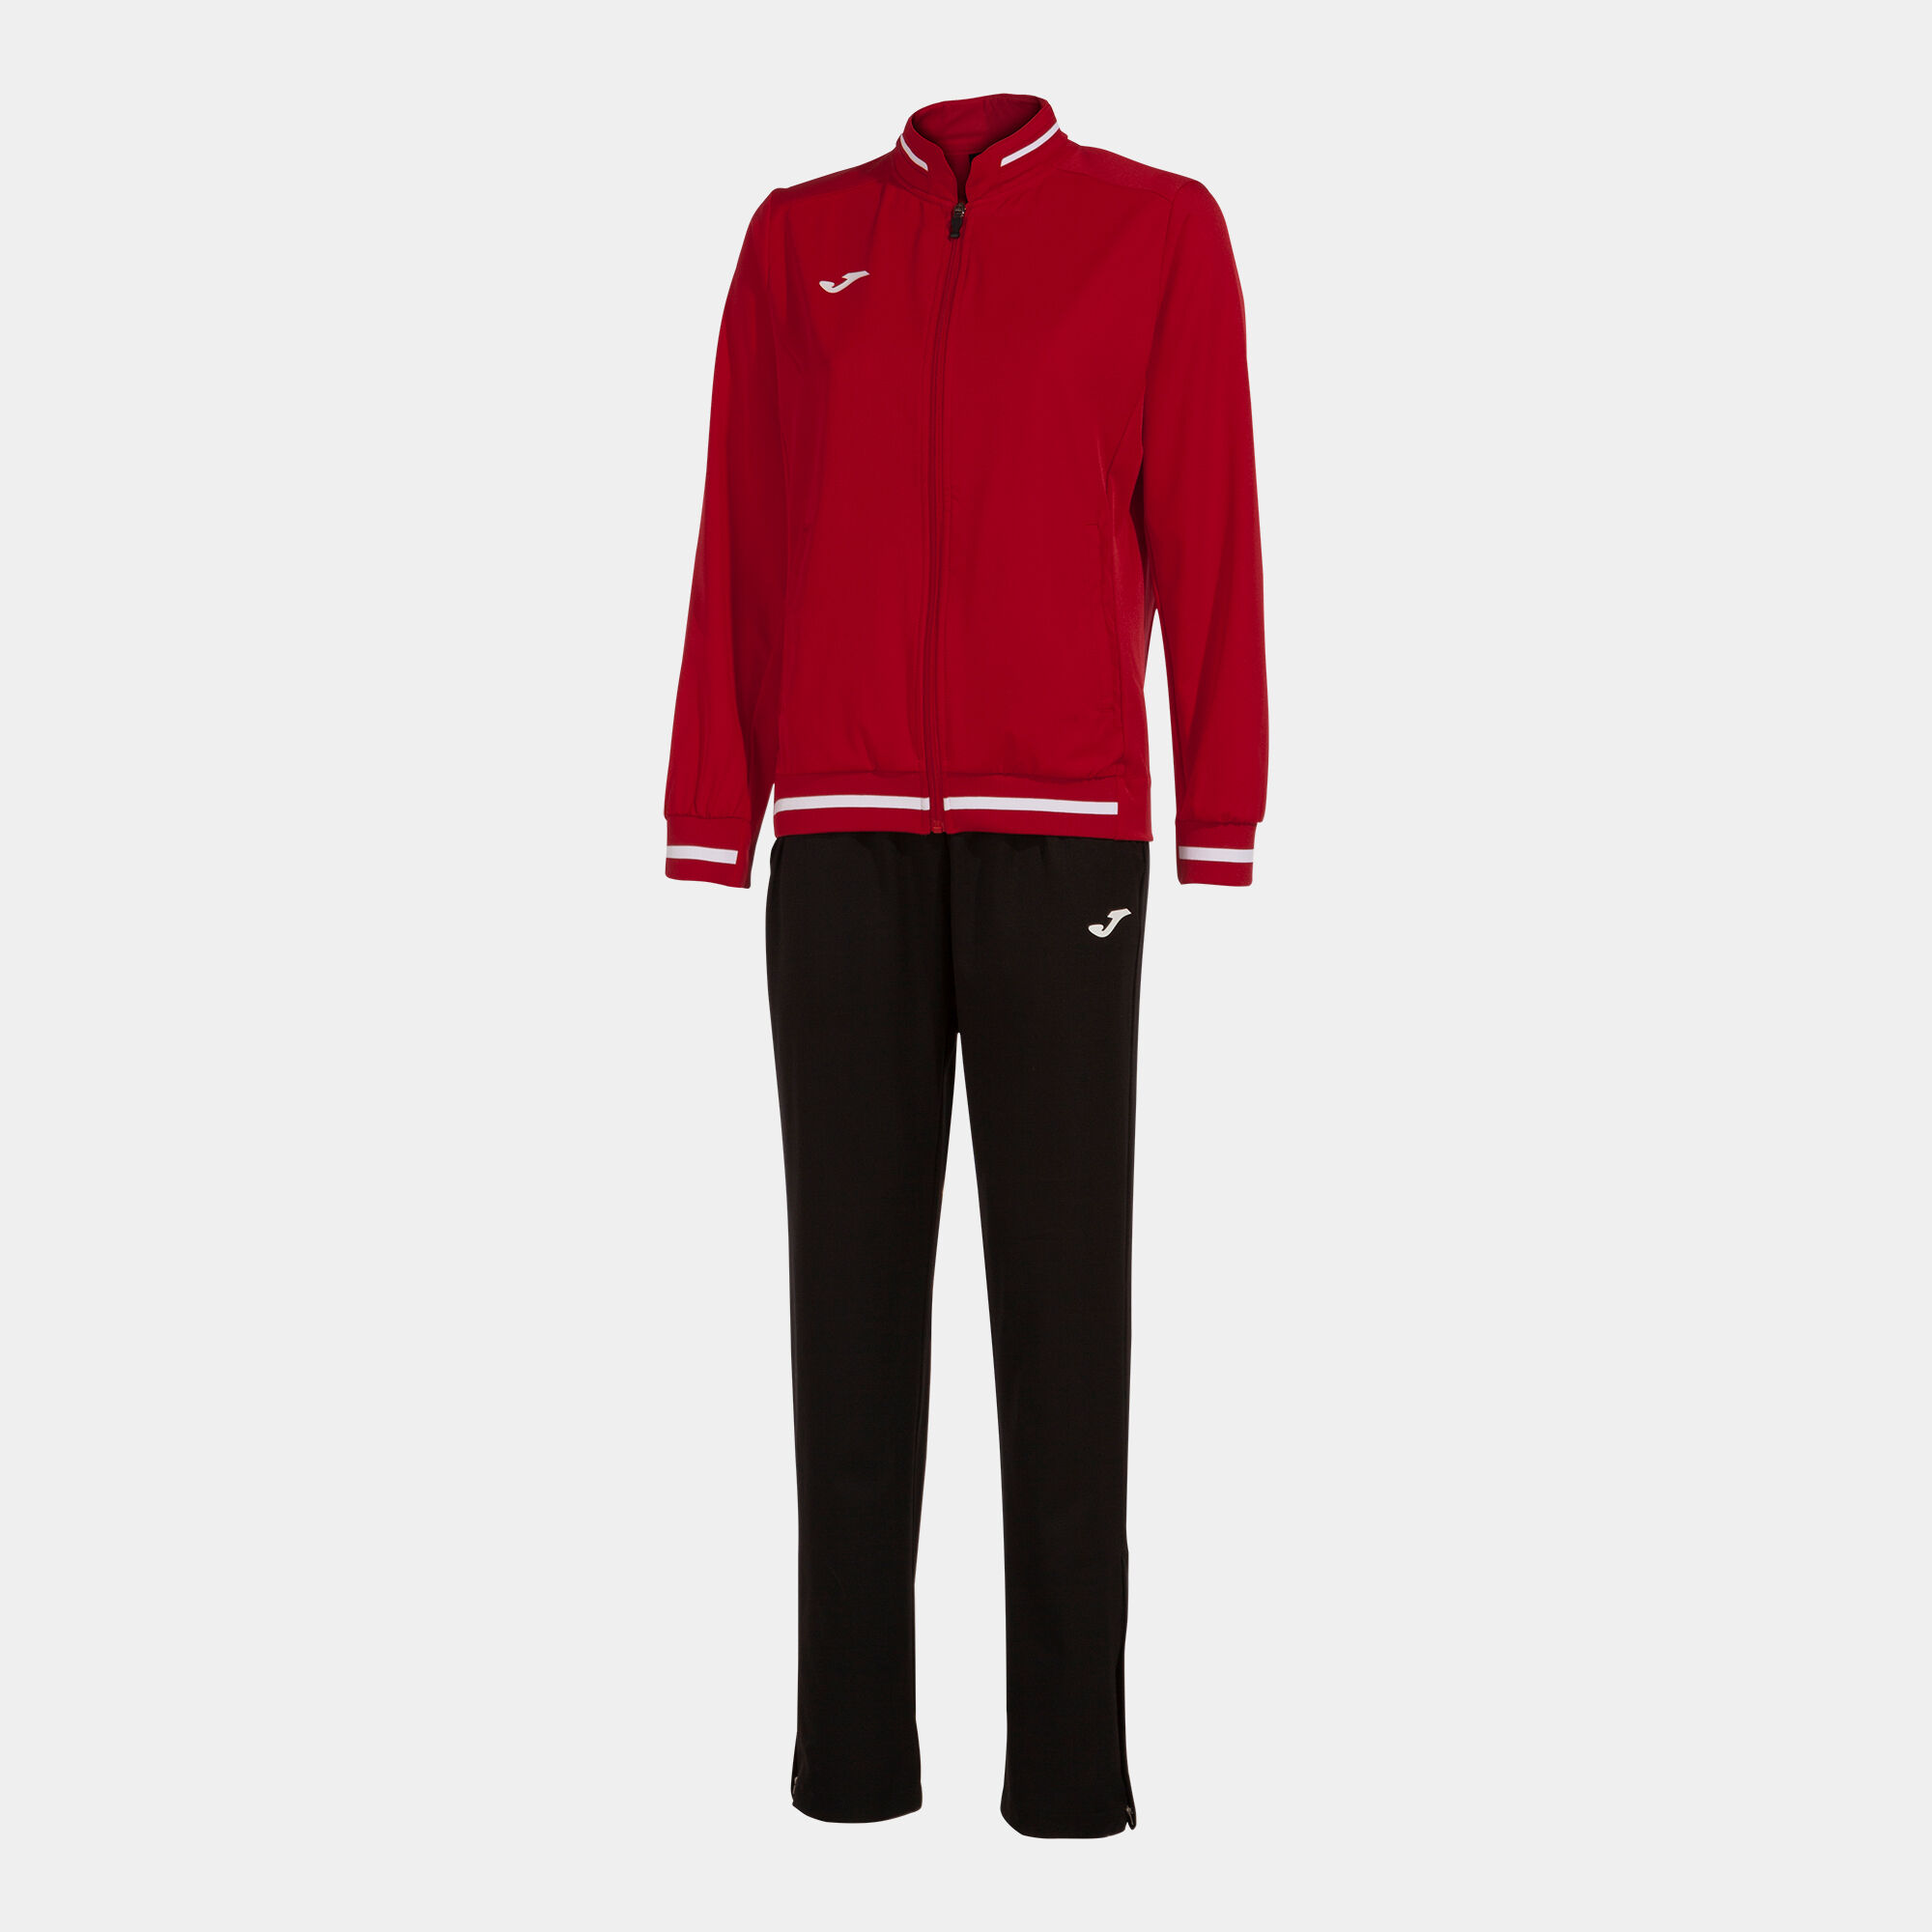 Tracksuit woman Montreal red black